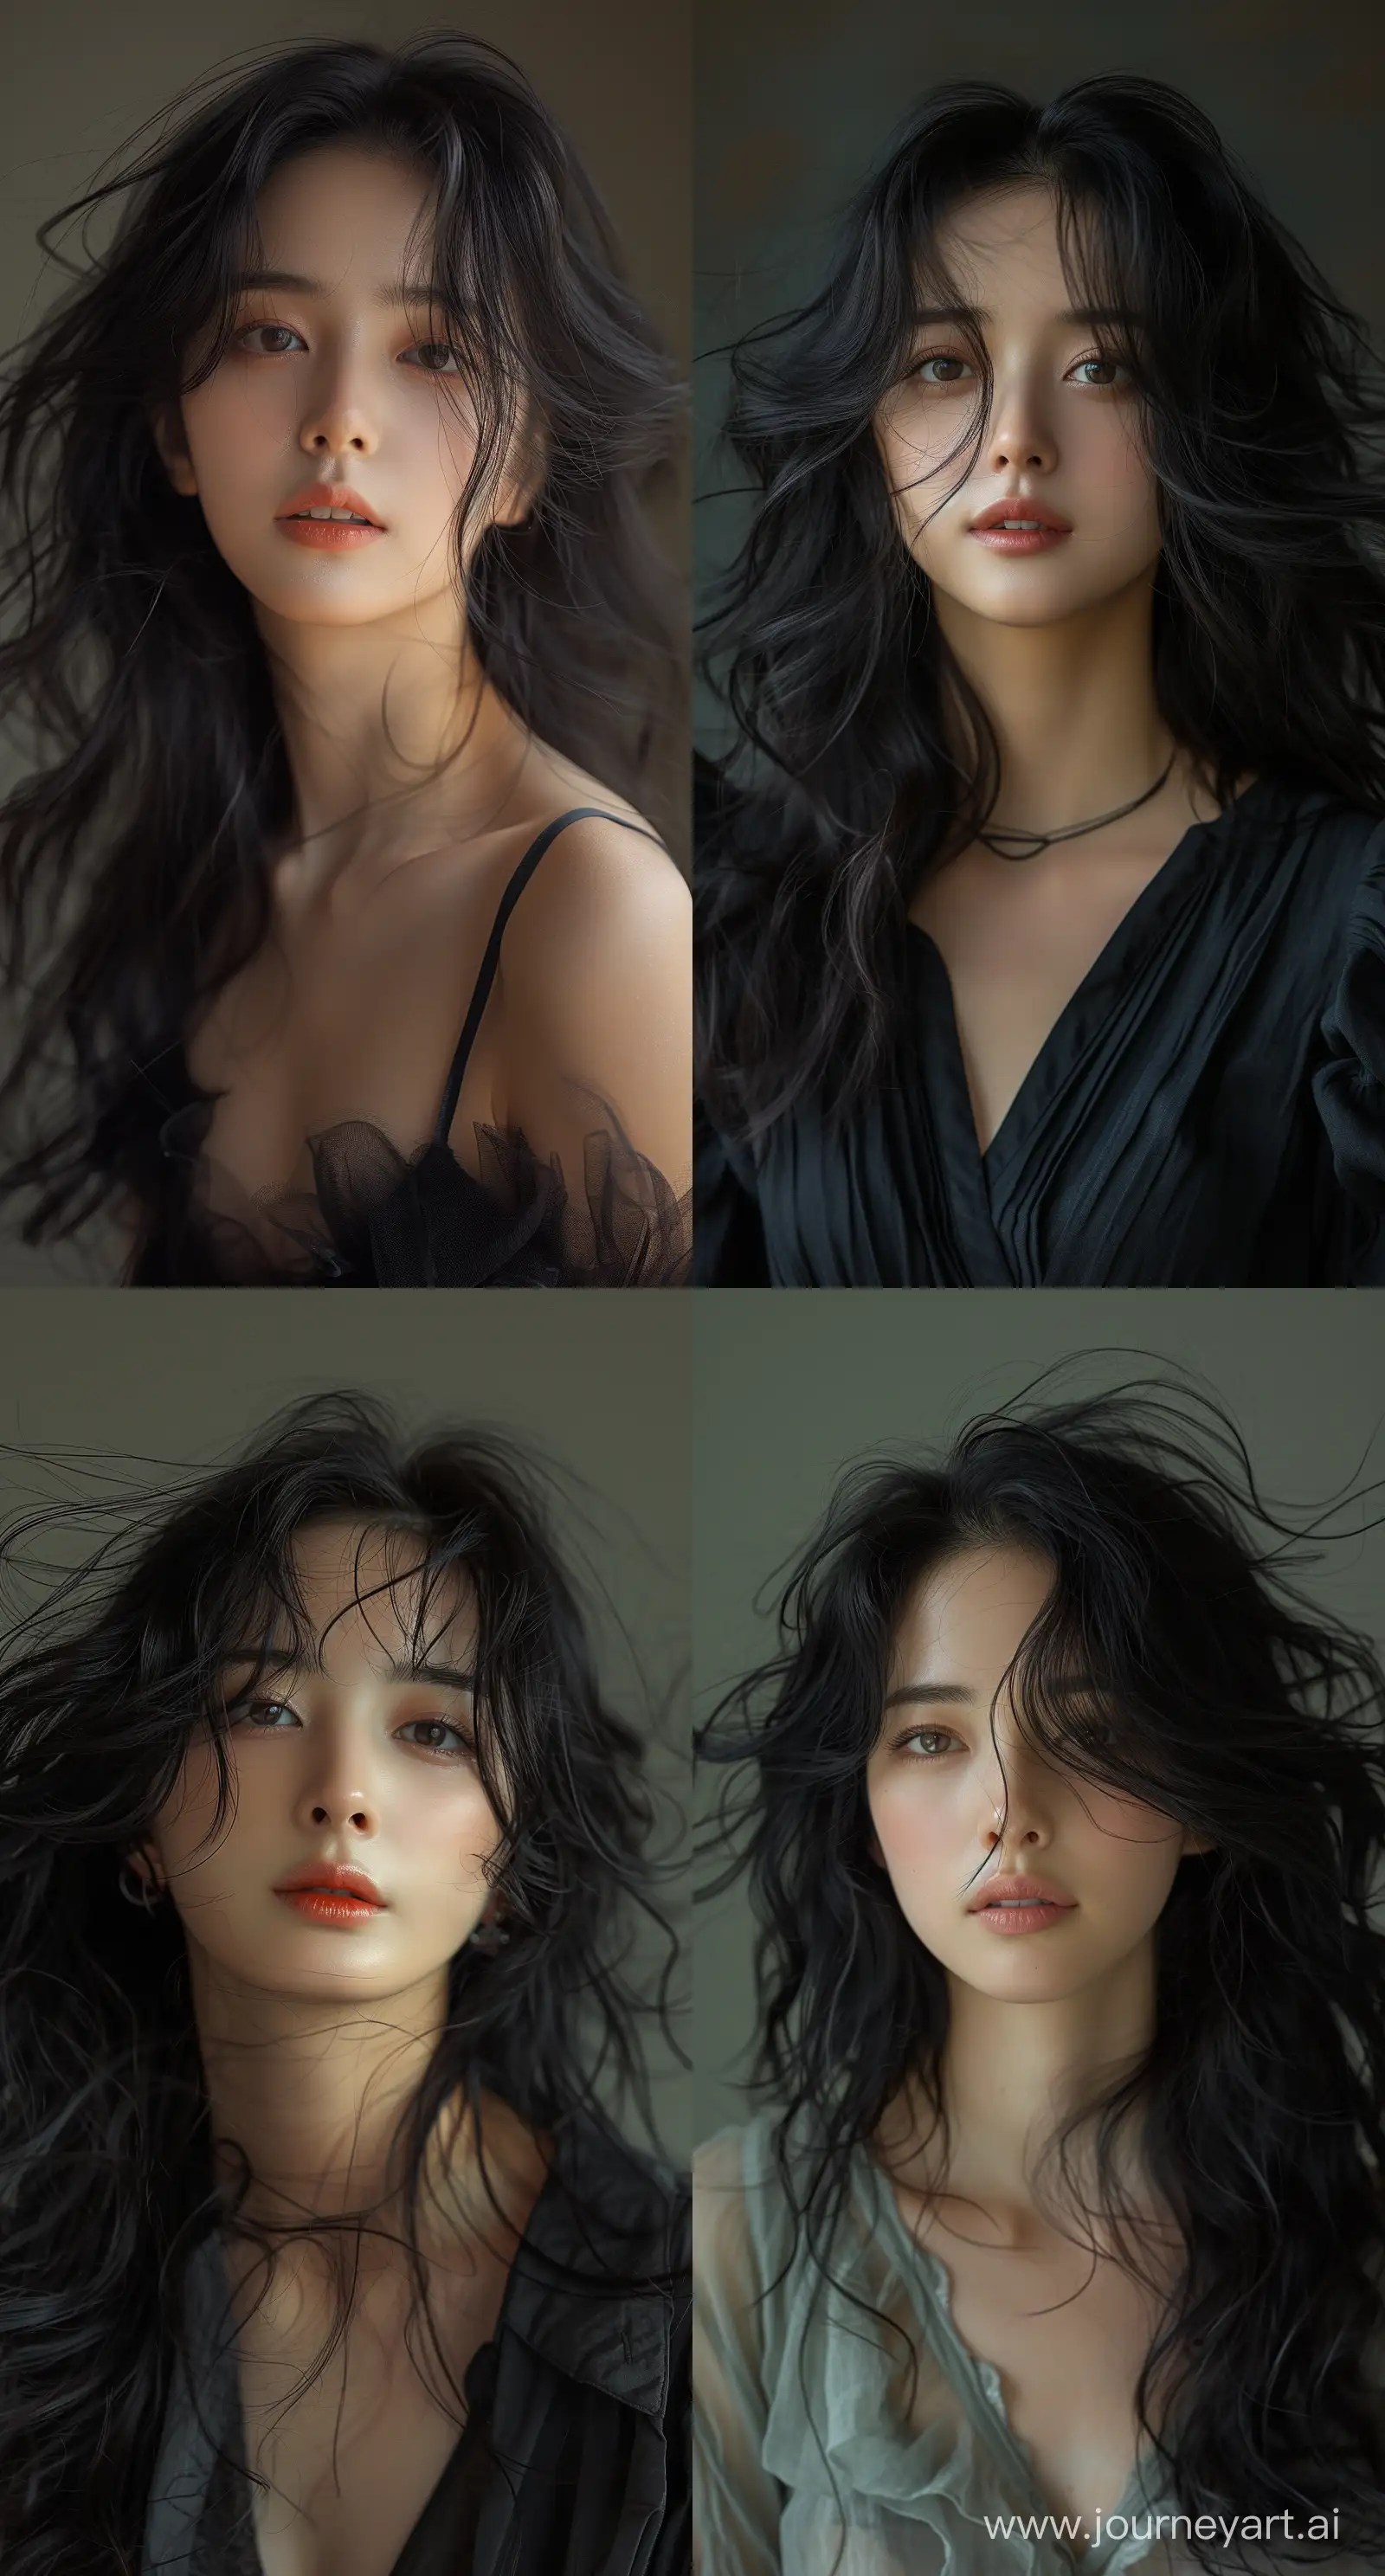 Multilayered-Portrait-of-a-Woman-with-Flowing-Black-Hair-in-Dain-Yoon-Style